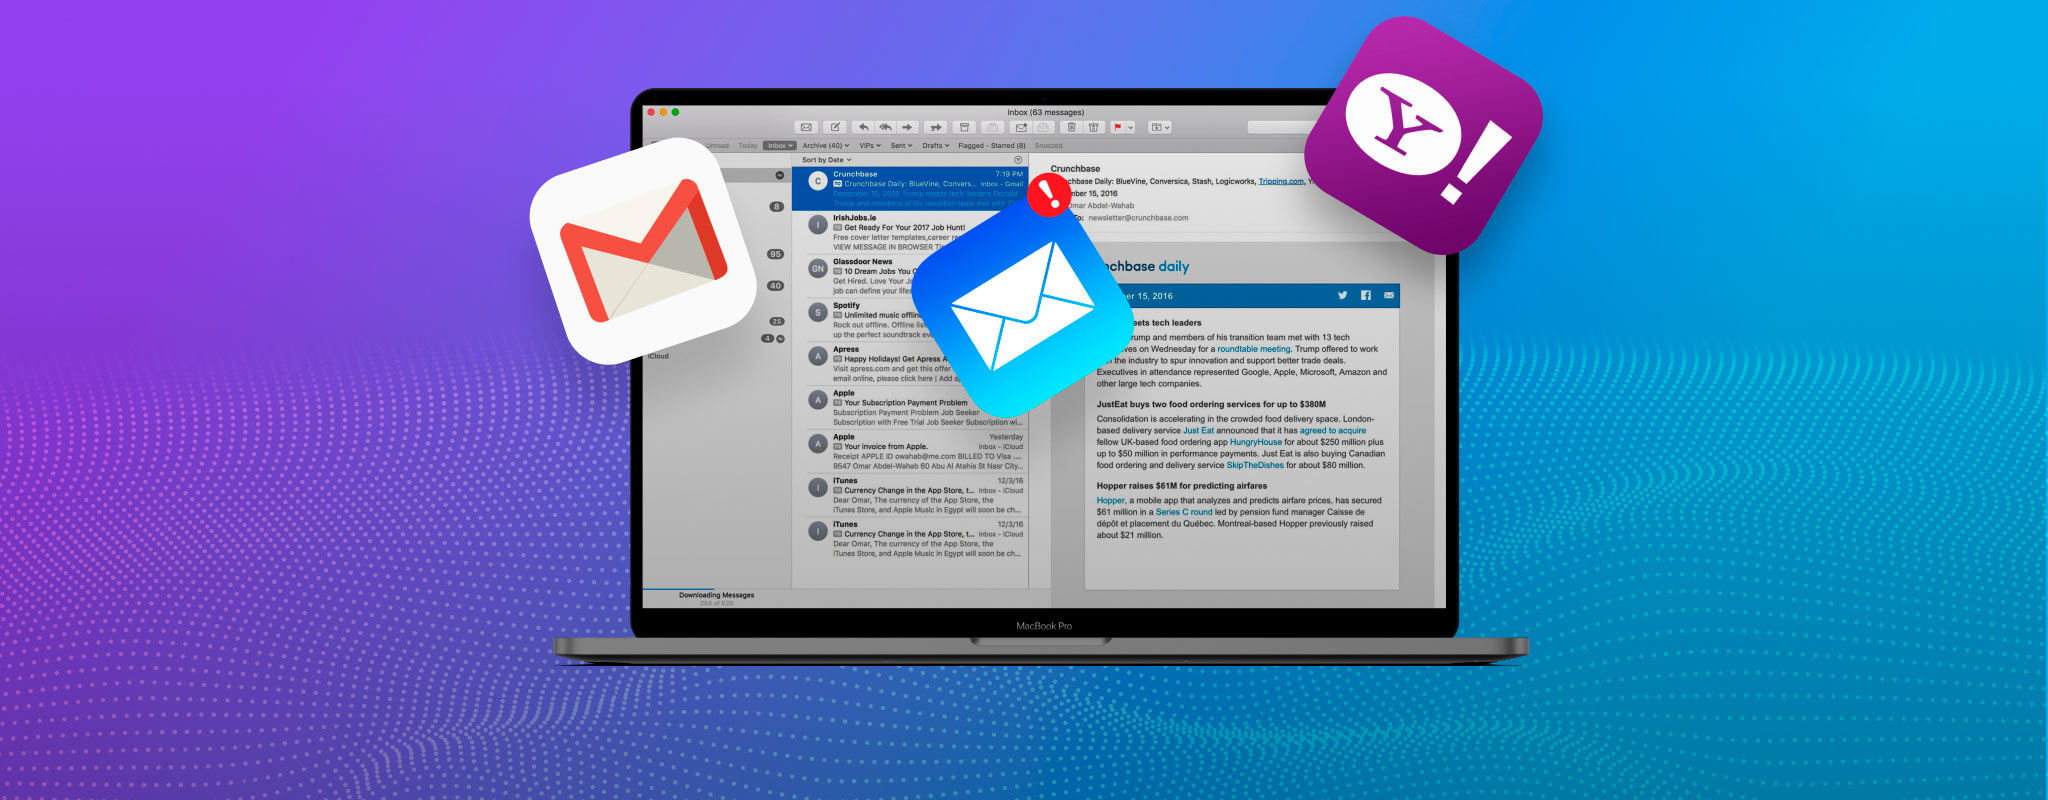 google mac email client